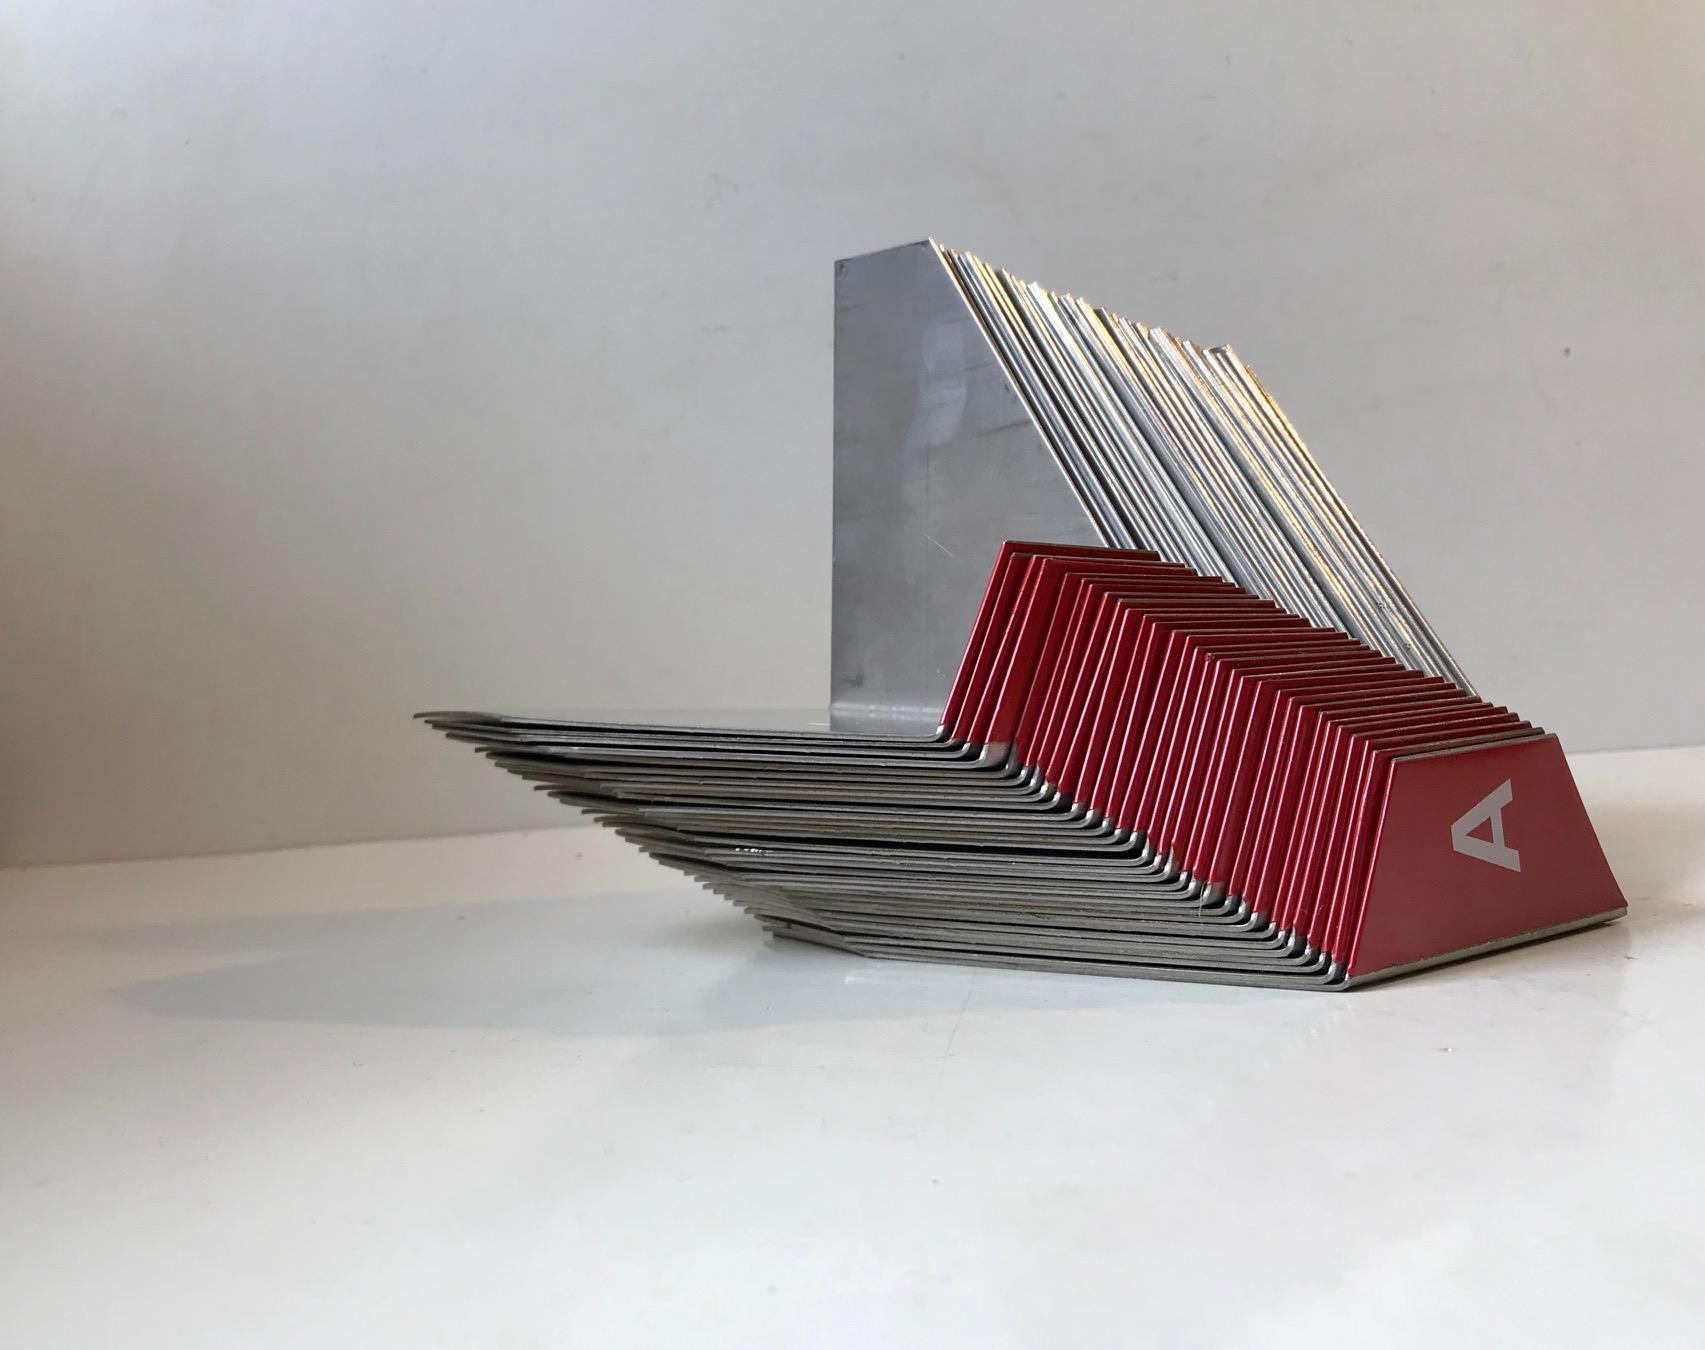 Custom made vintage alphabetical office bookends. A complete set from A-Z plus the Danish letters: æ, ø, å. 3o or 31 in total. They are made from stainless steel and has letters ion red foil. They were made in Scandinavia during the 1970s for a